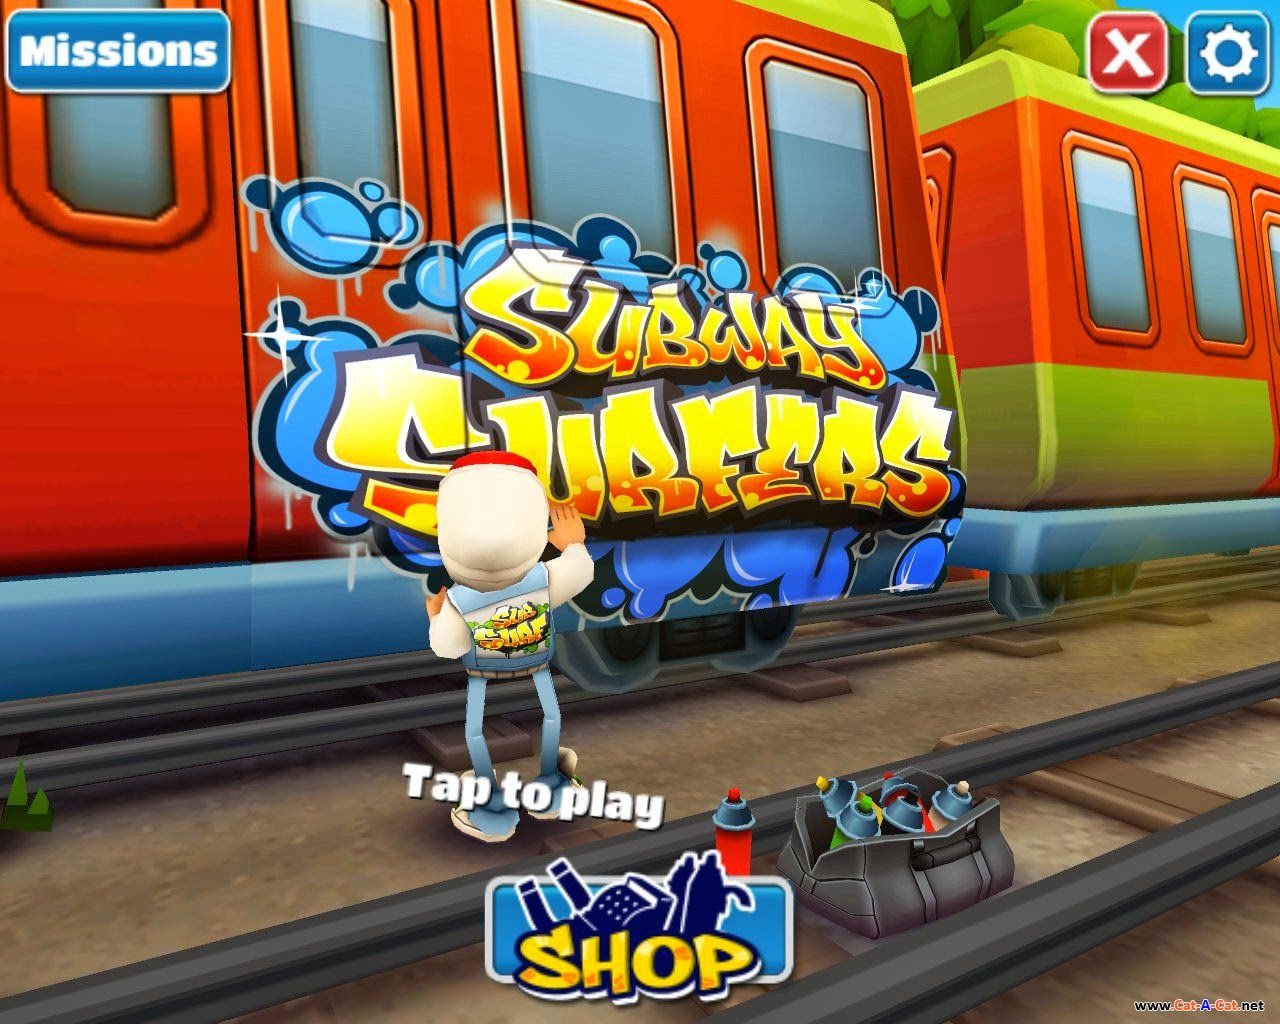 download subway surfers for pc windows 7 full version